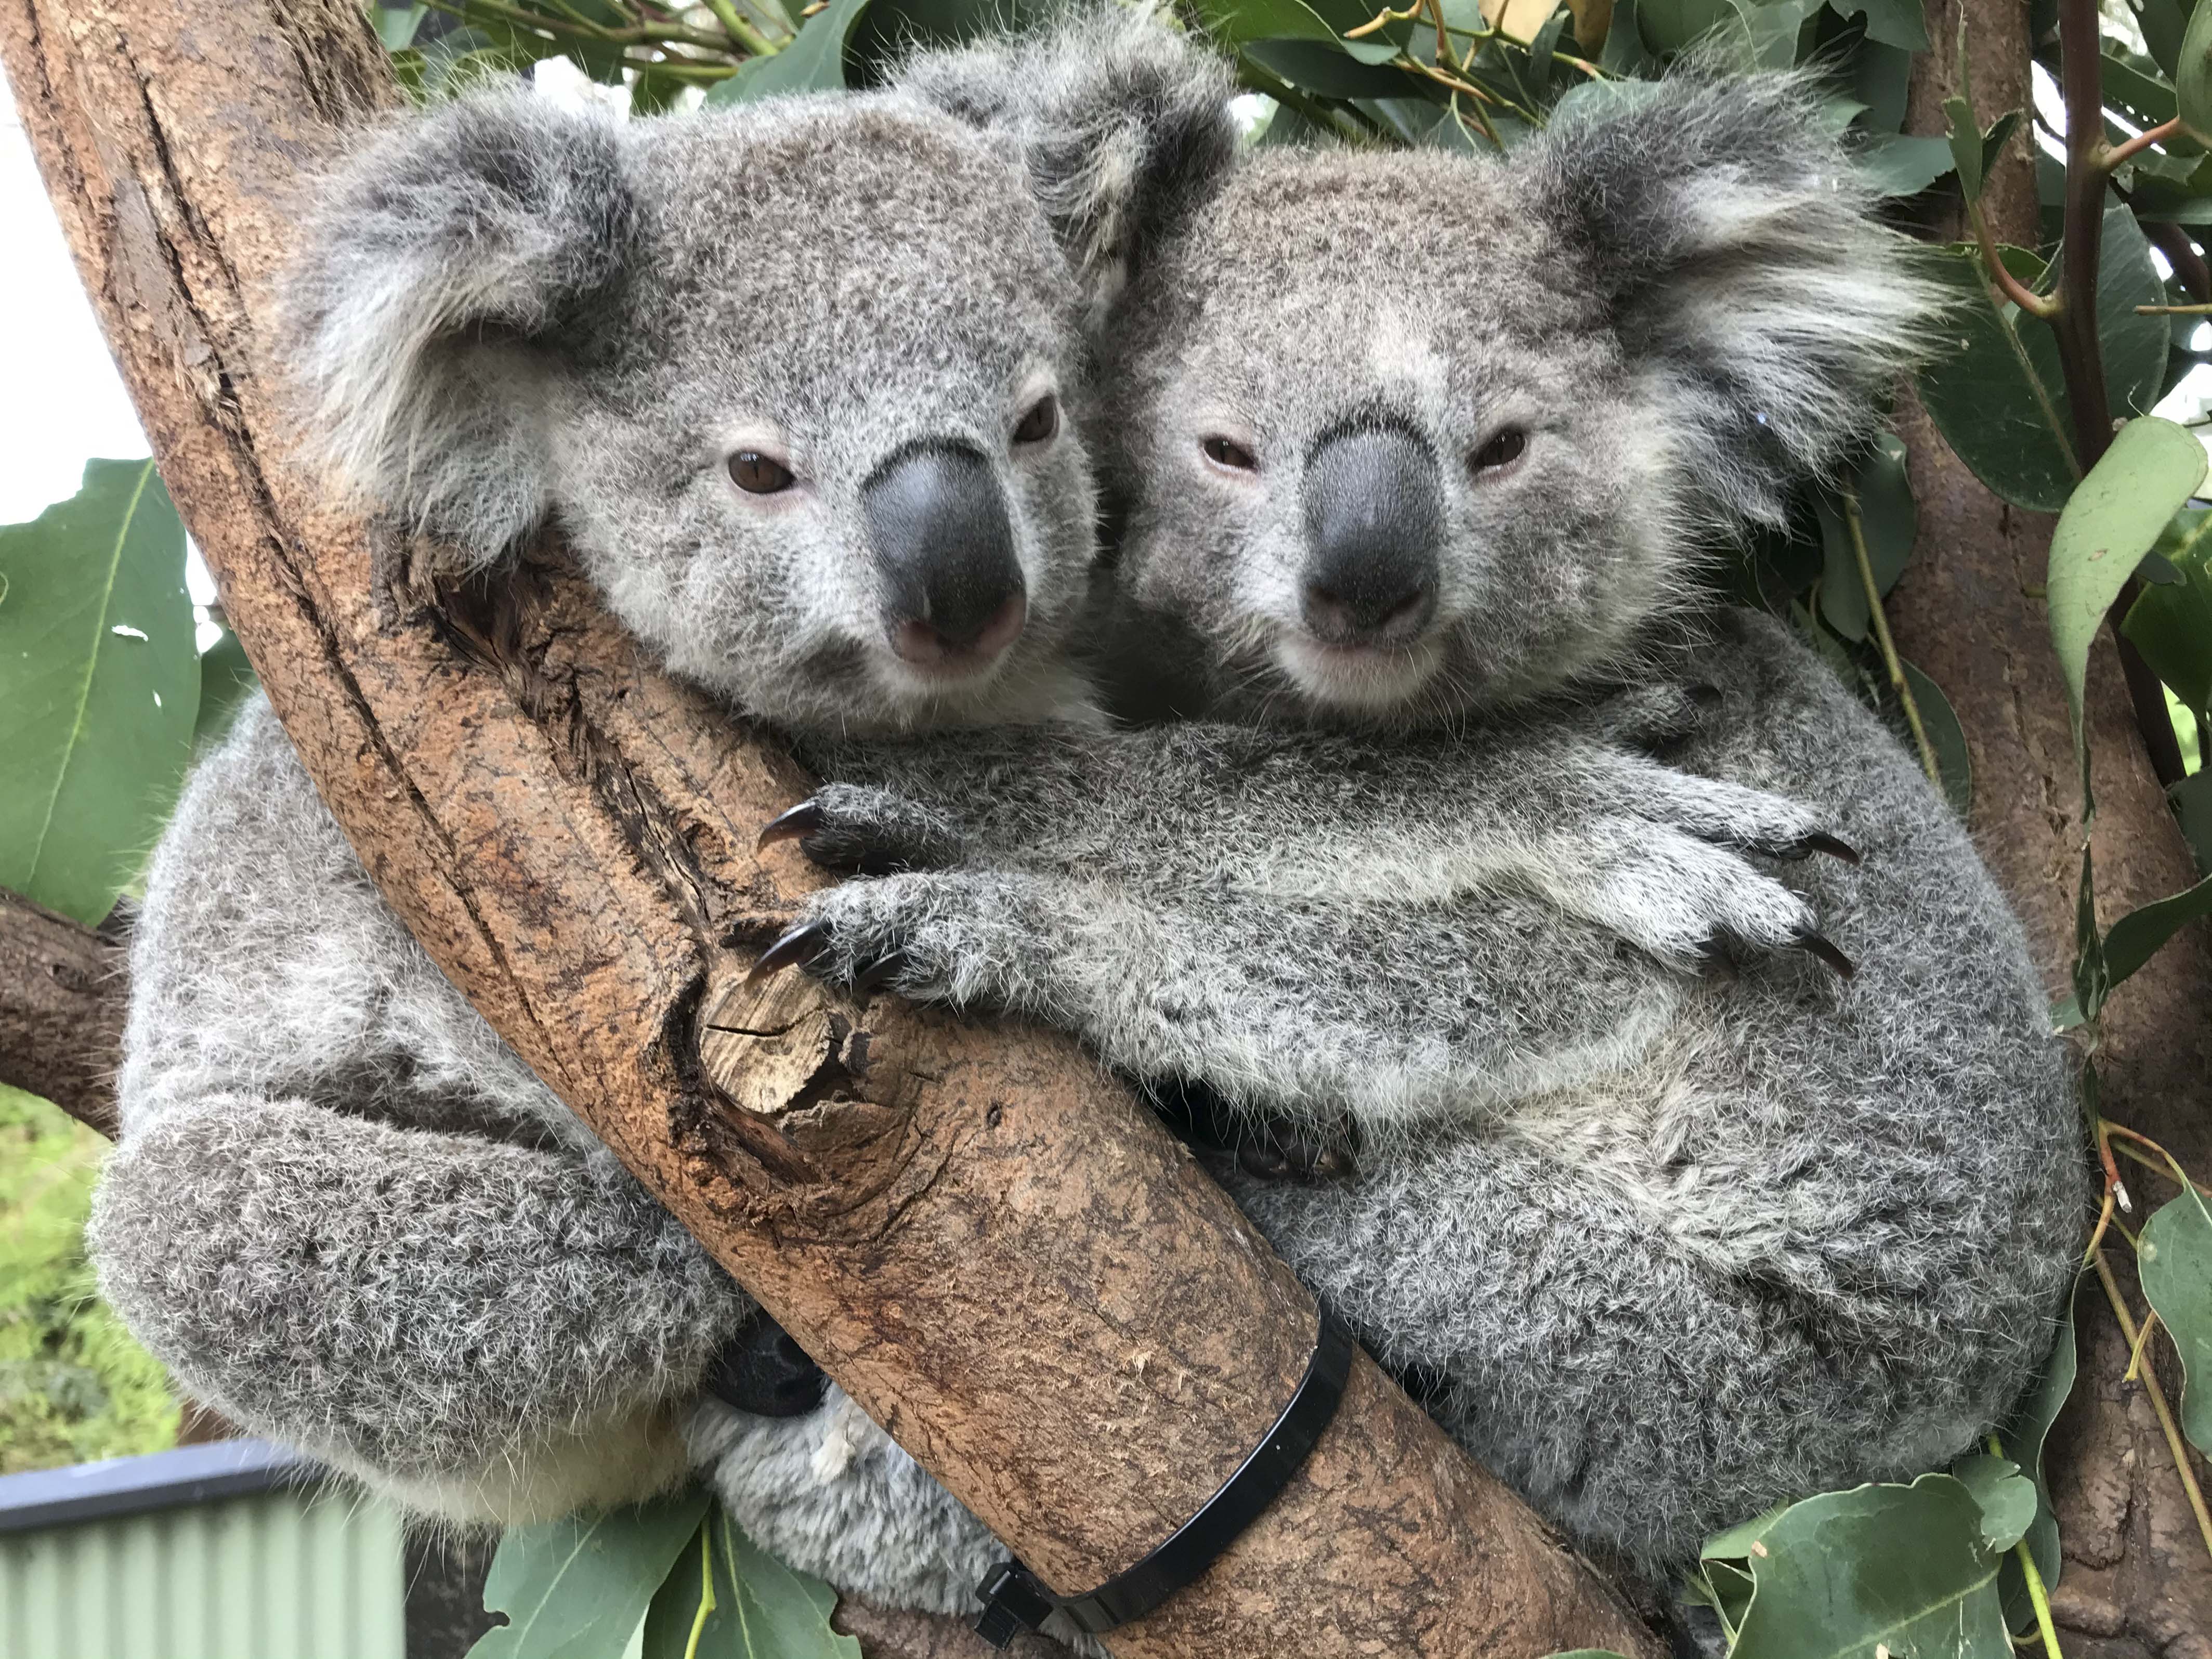 Photos of Koalas ‘Hugging It Out’ at Australian Reptile Park Are ...